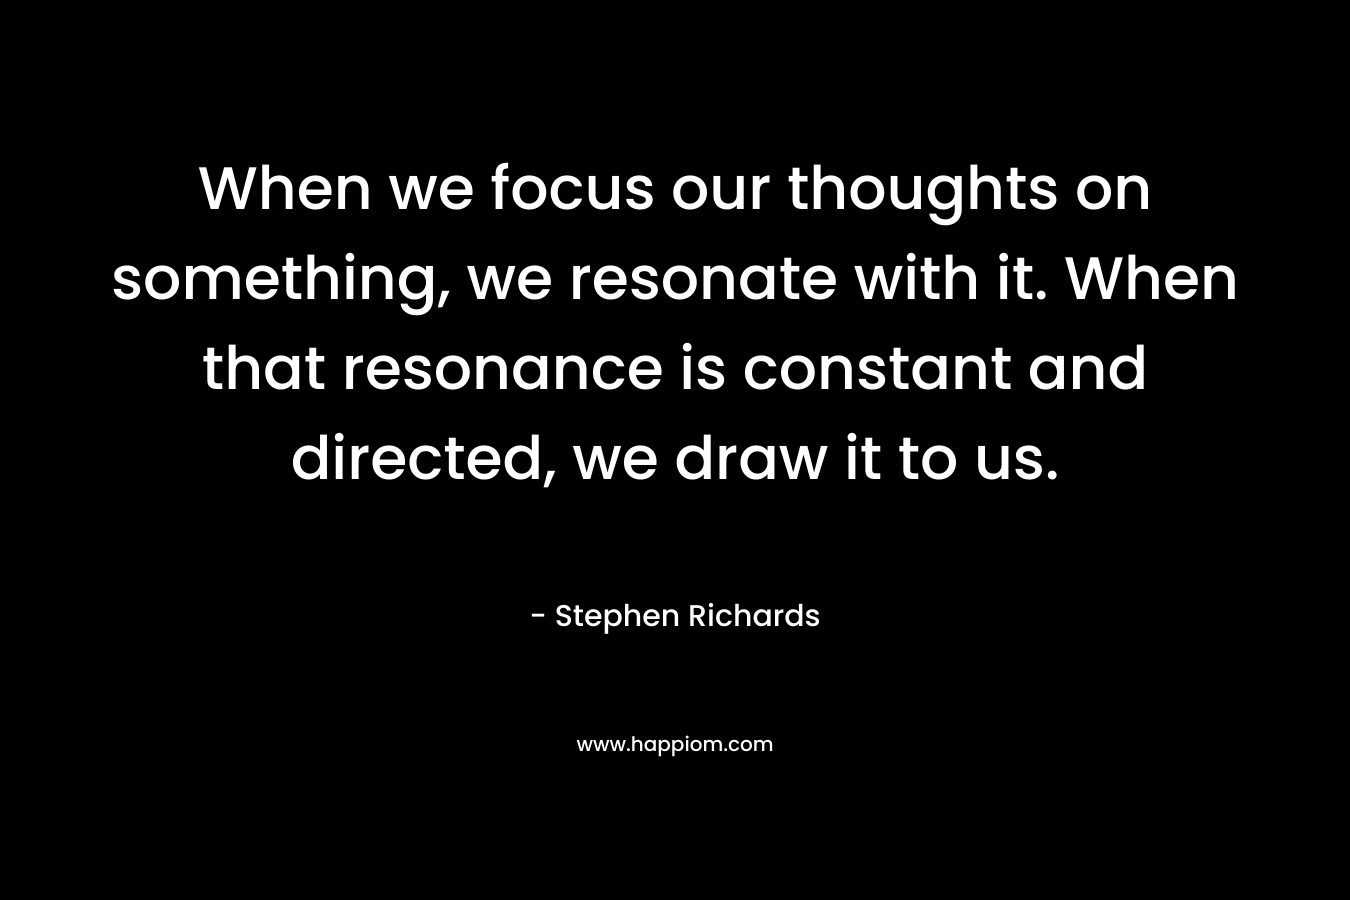 When we focus our thoughts on something, we resonate with it. When that resonance is constant and directed, we draw it to us.